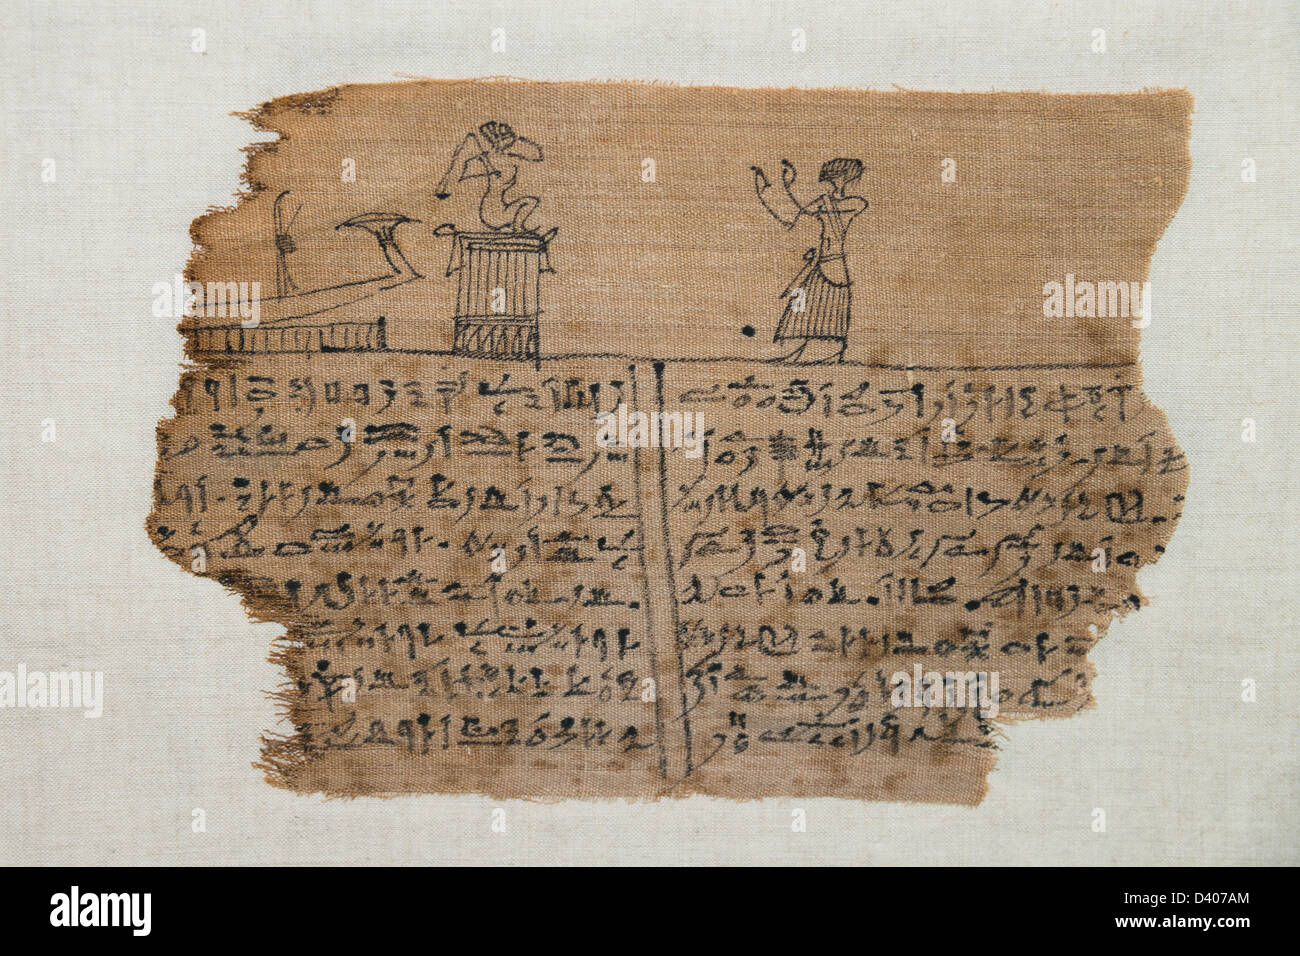 Excerpt from the ancient Egyptian book of the dead on display at the Royal Ontario Museum, Toronto, Canada. Stock Photo